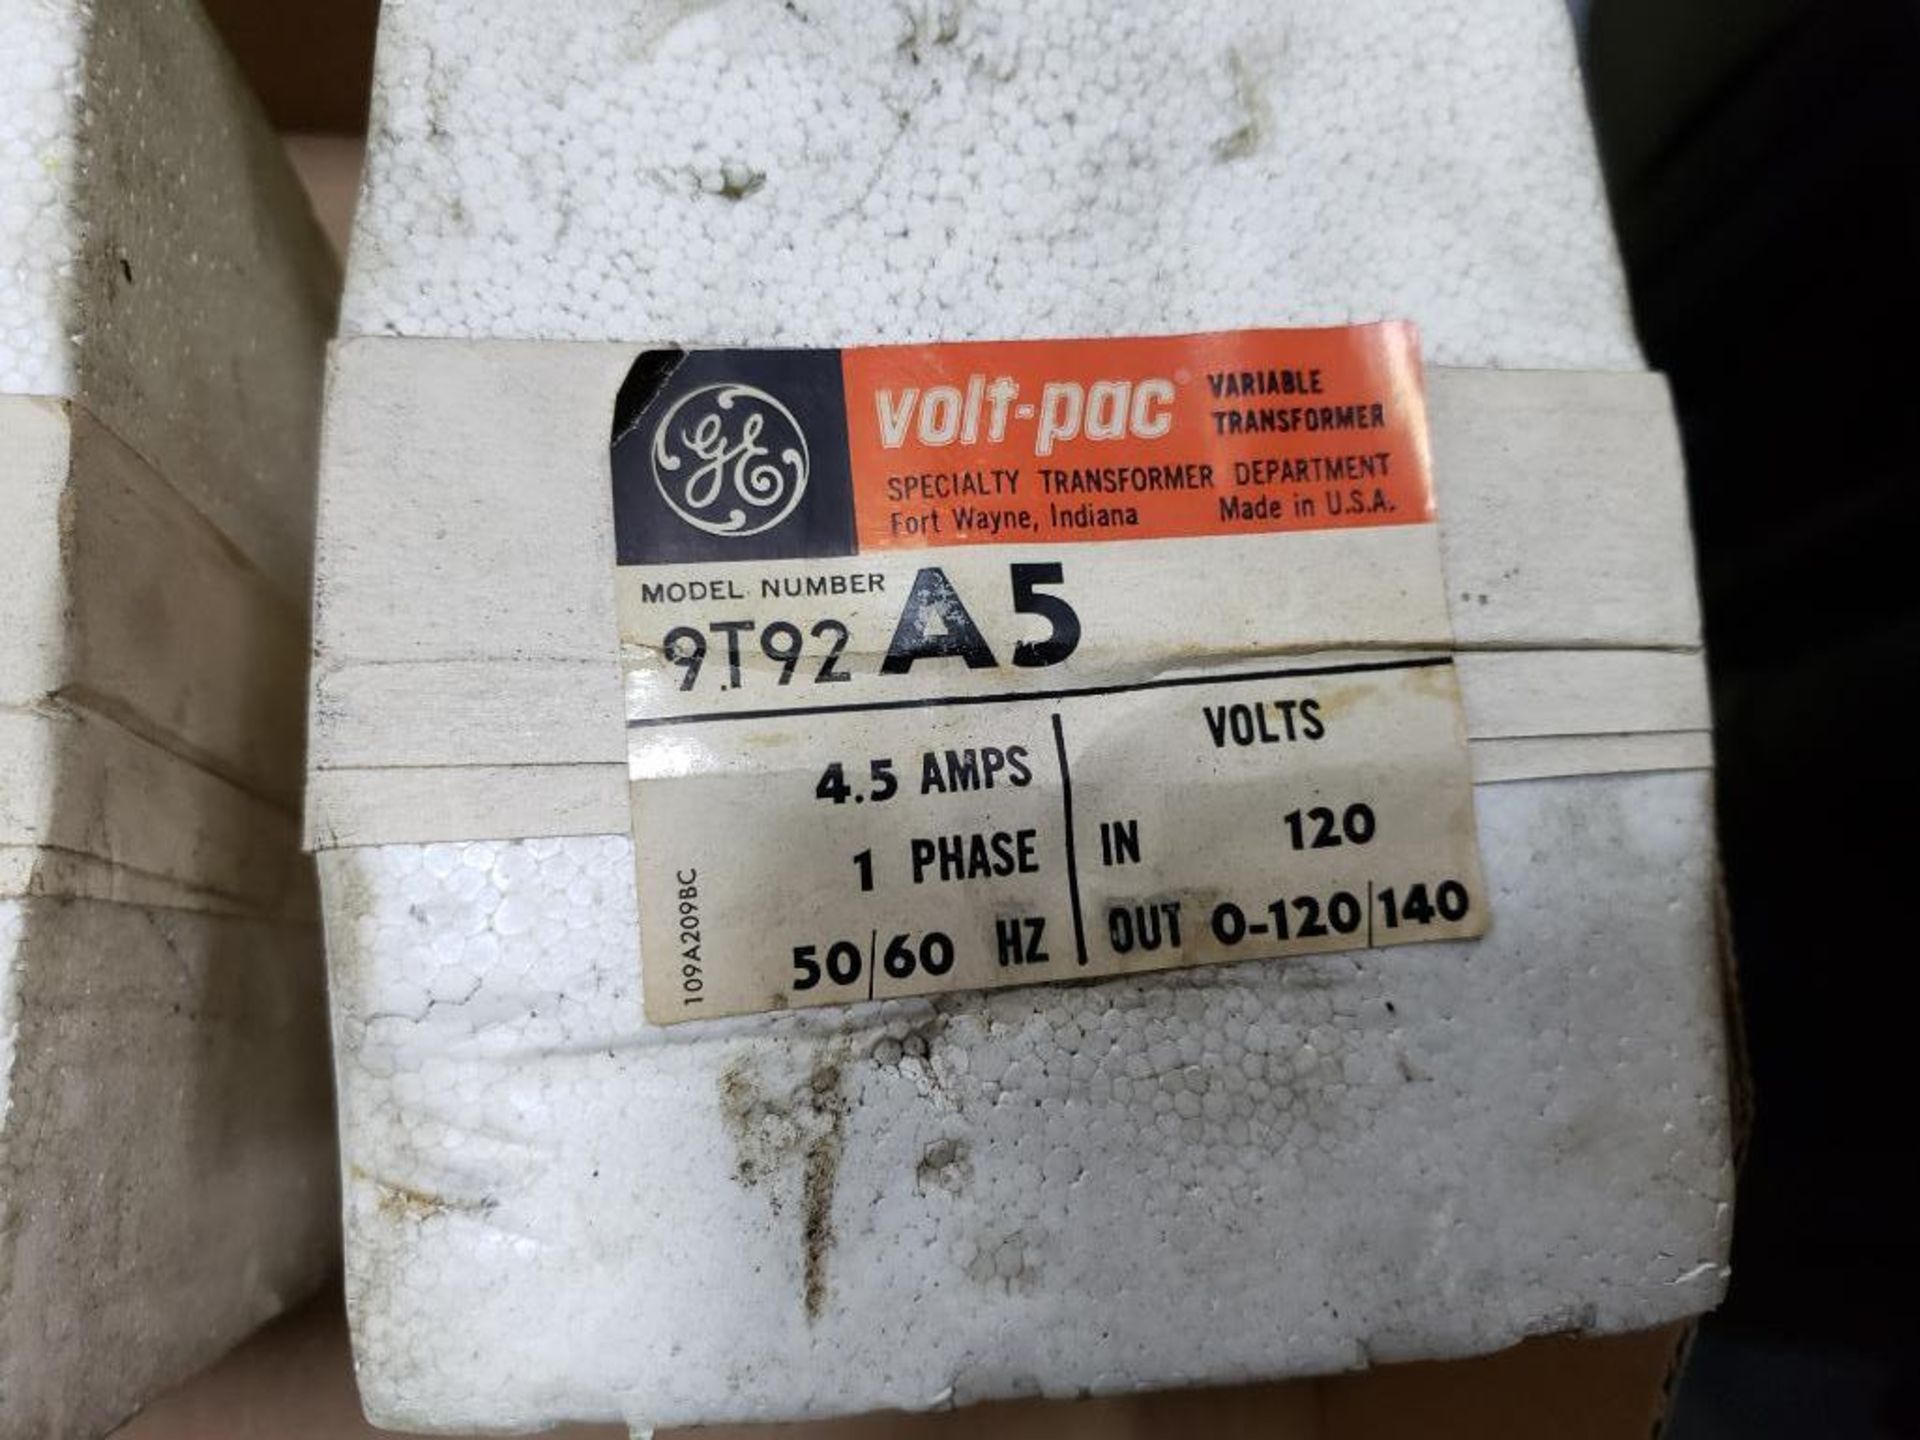 Qty 2 - GE Volt-pac variable transformers. Model 9T92A5. New in package. - Image 3 of 4